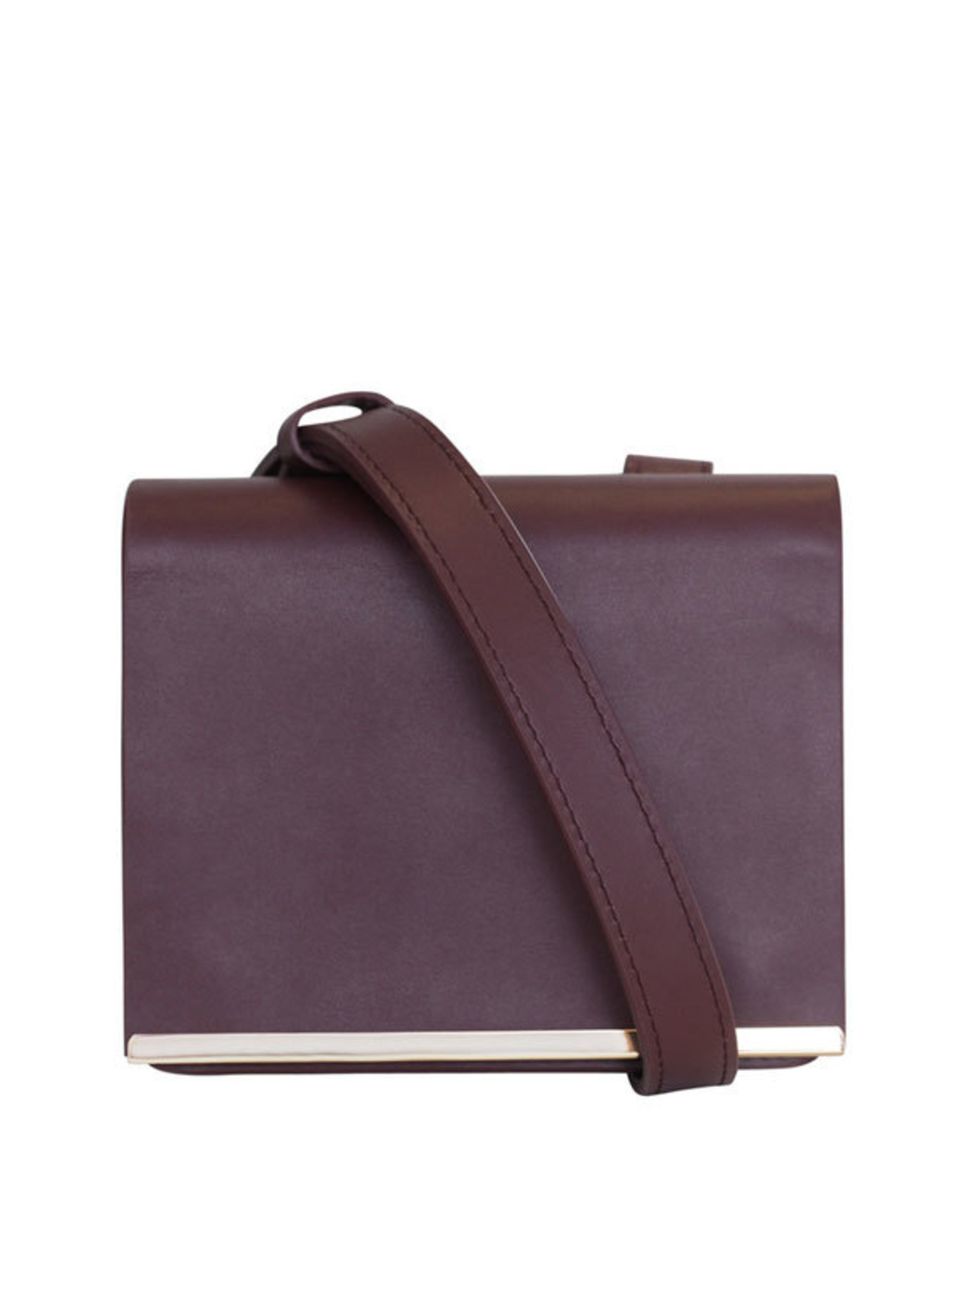 <p>Raoul burgundy leather 'Kim' bag, £175, at <a href="http://www.matchesfashion.com/fcp/product/Matches-Fashion//raoul-RAO-B-1007ABG-bags-BURGUNDY/51011">Matches</a></p>